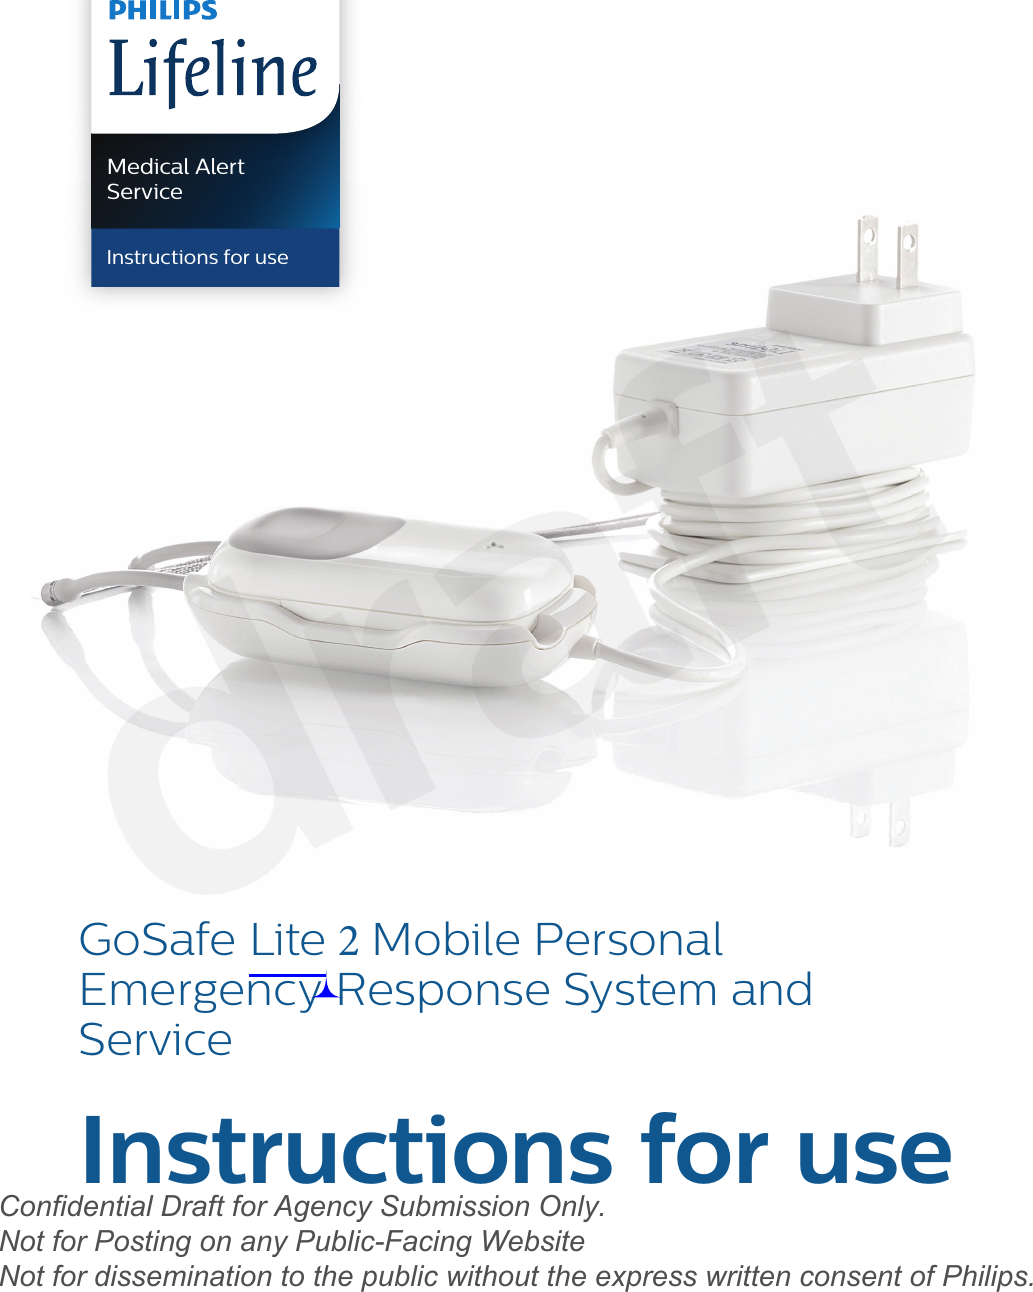 GoSafe Lite 2 Mobile Personal Emergency Response System and ServiceInstructions for useMedical Alert ServiceInstructions for usedraftConfidential Draft for Agency Submission Only.   Not for Posting on any Public-Facing Website Not for dissemination to the public without the express written consent of Philips.